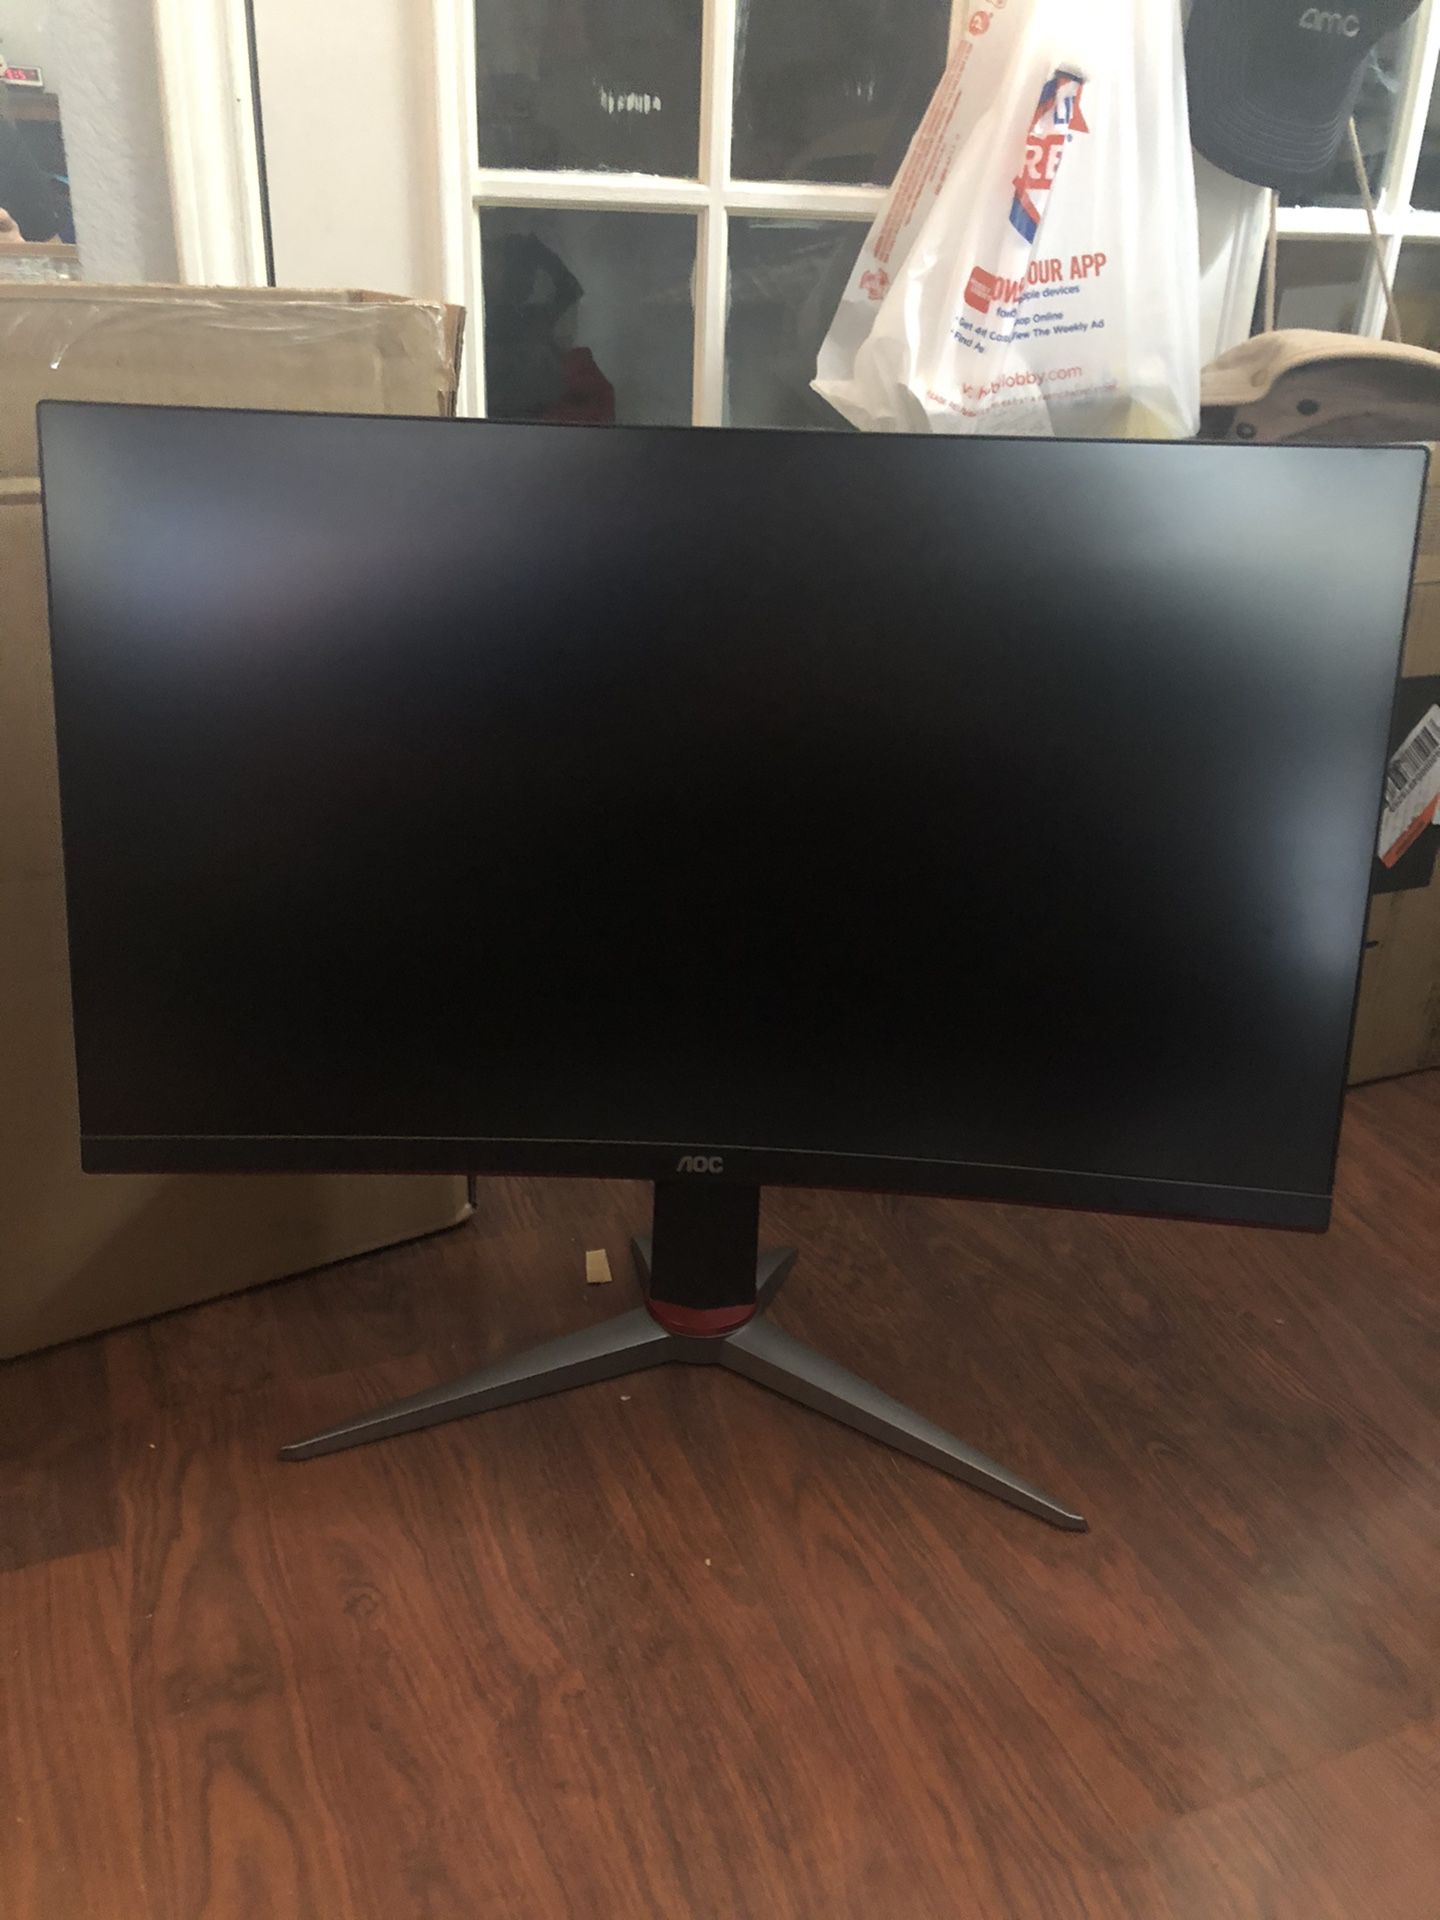 1440p 27 inch GAMING MONITOR CURVED